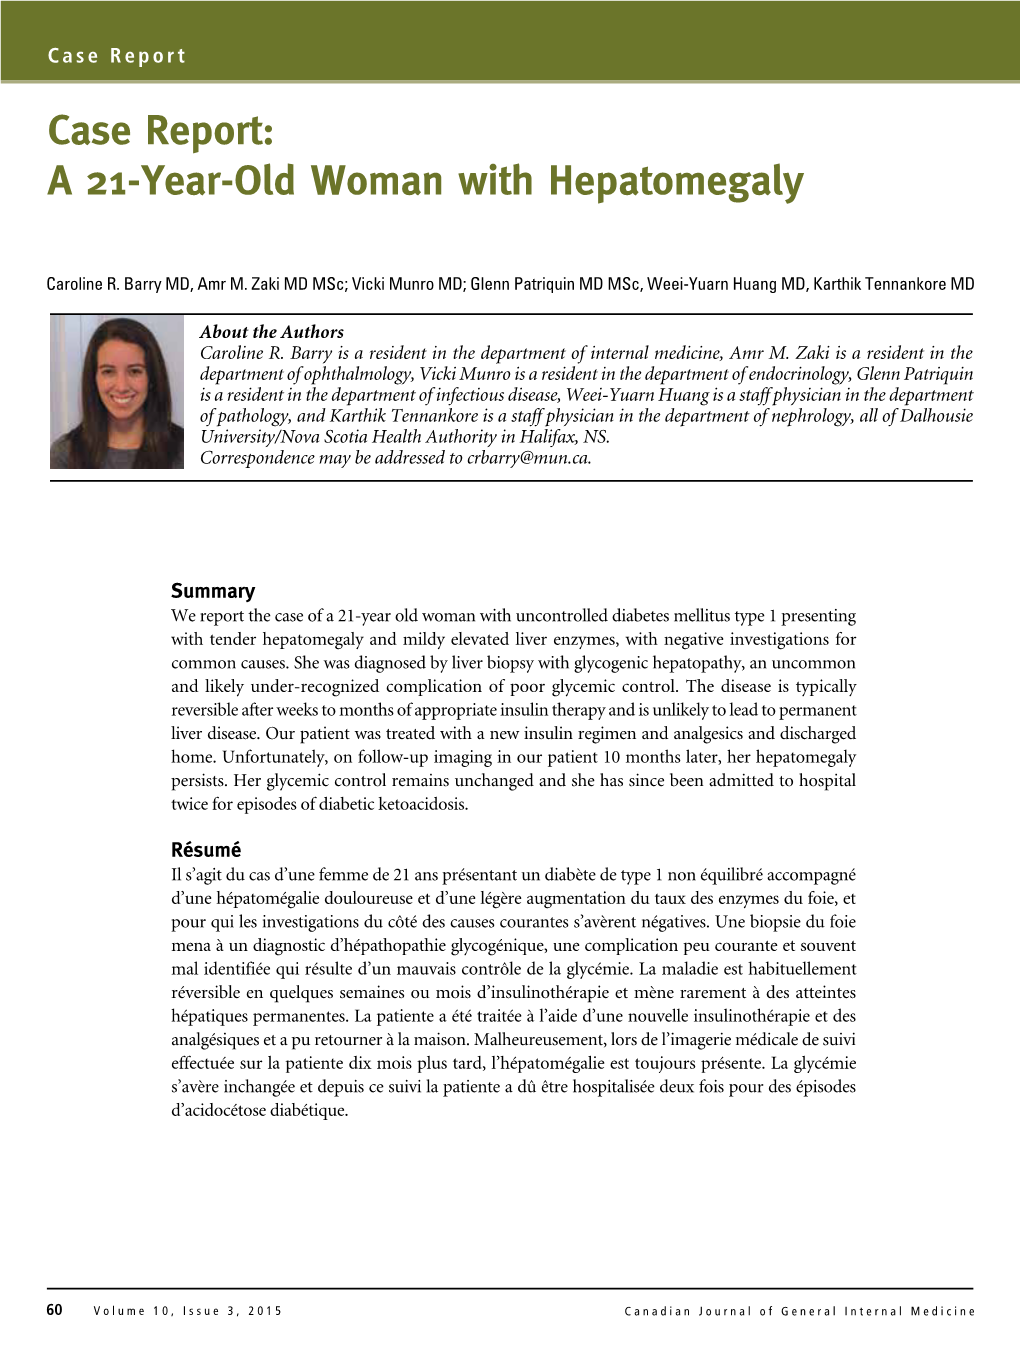 Case Report: a 21-Year-Old Woman with Hepatomegaly